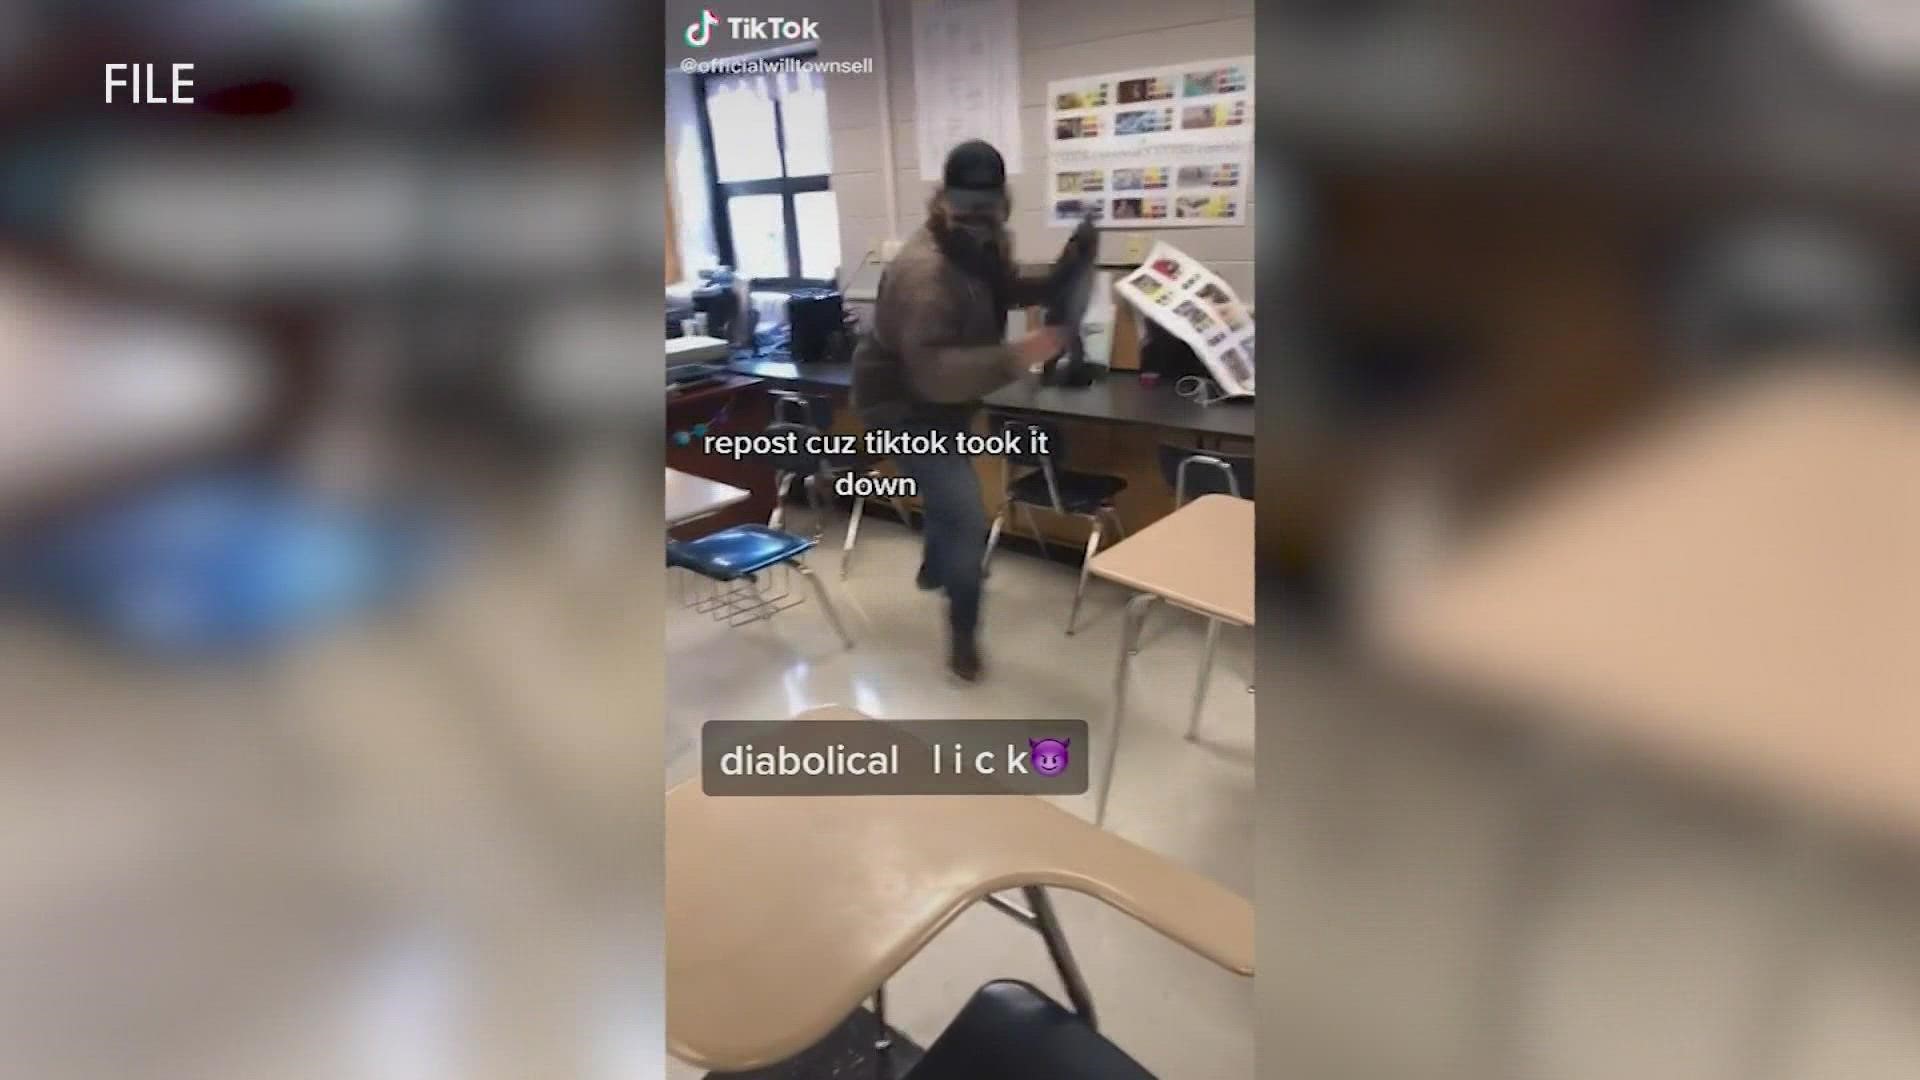 The challenge encourages TikTok users to post videos of themselves stealing items and damaging school bathrooms and classrooms.